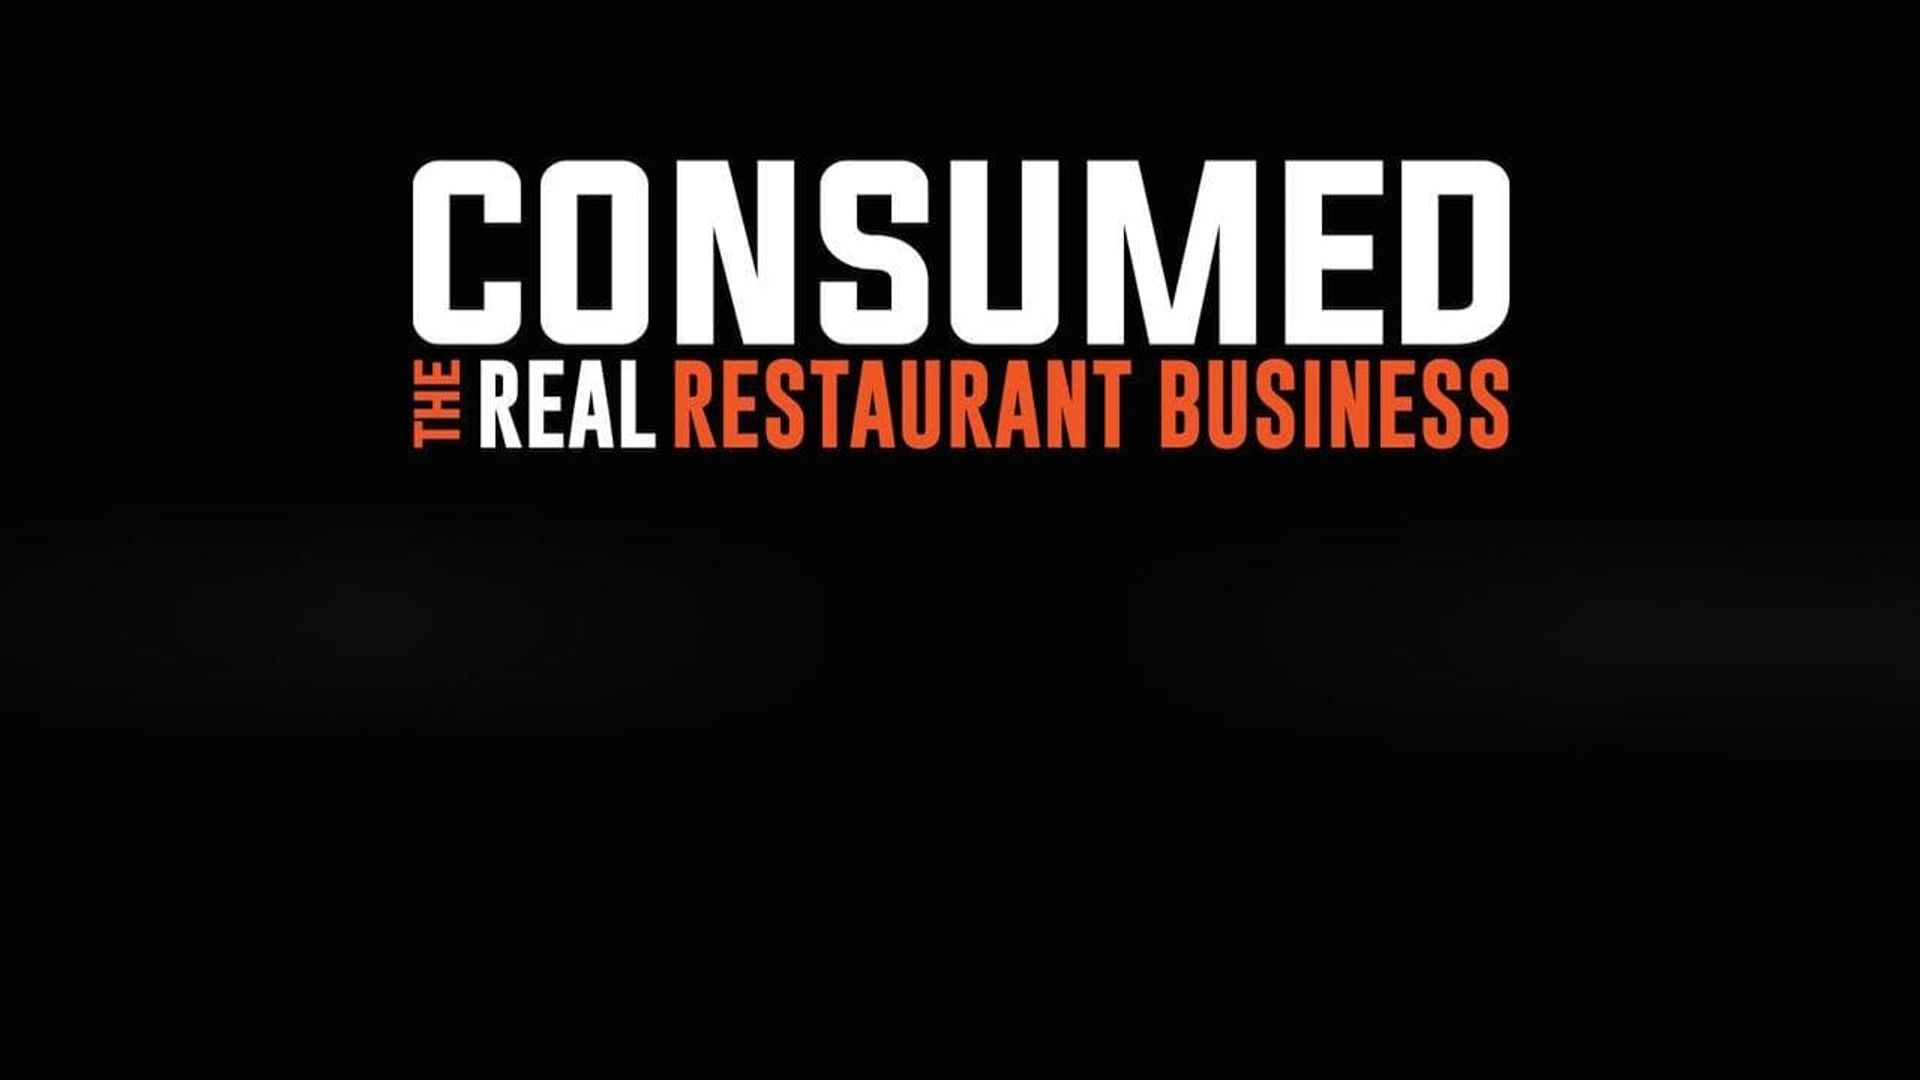 Consumed: The Real Restaurant Business background